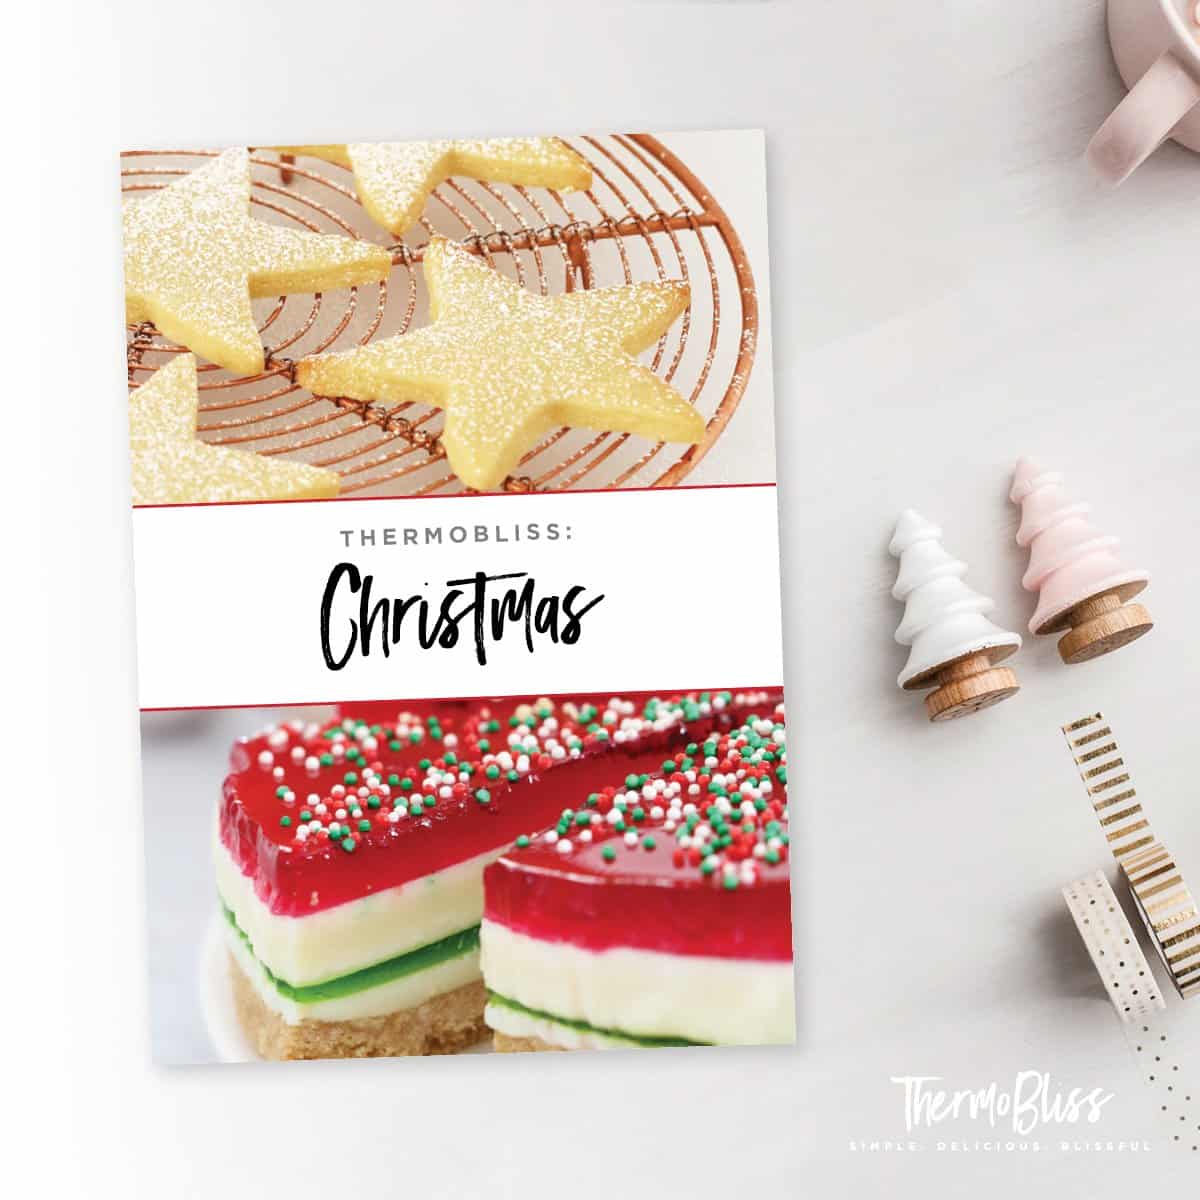 A ThermoBliss Christmas Recipe book with jelly slice and shortbread on the cover